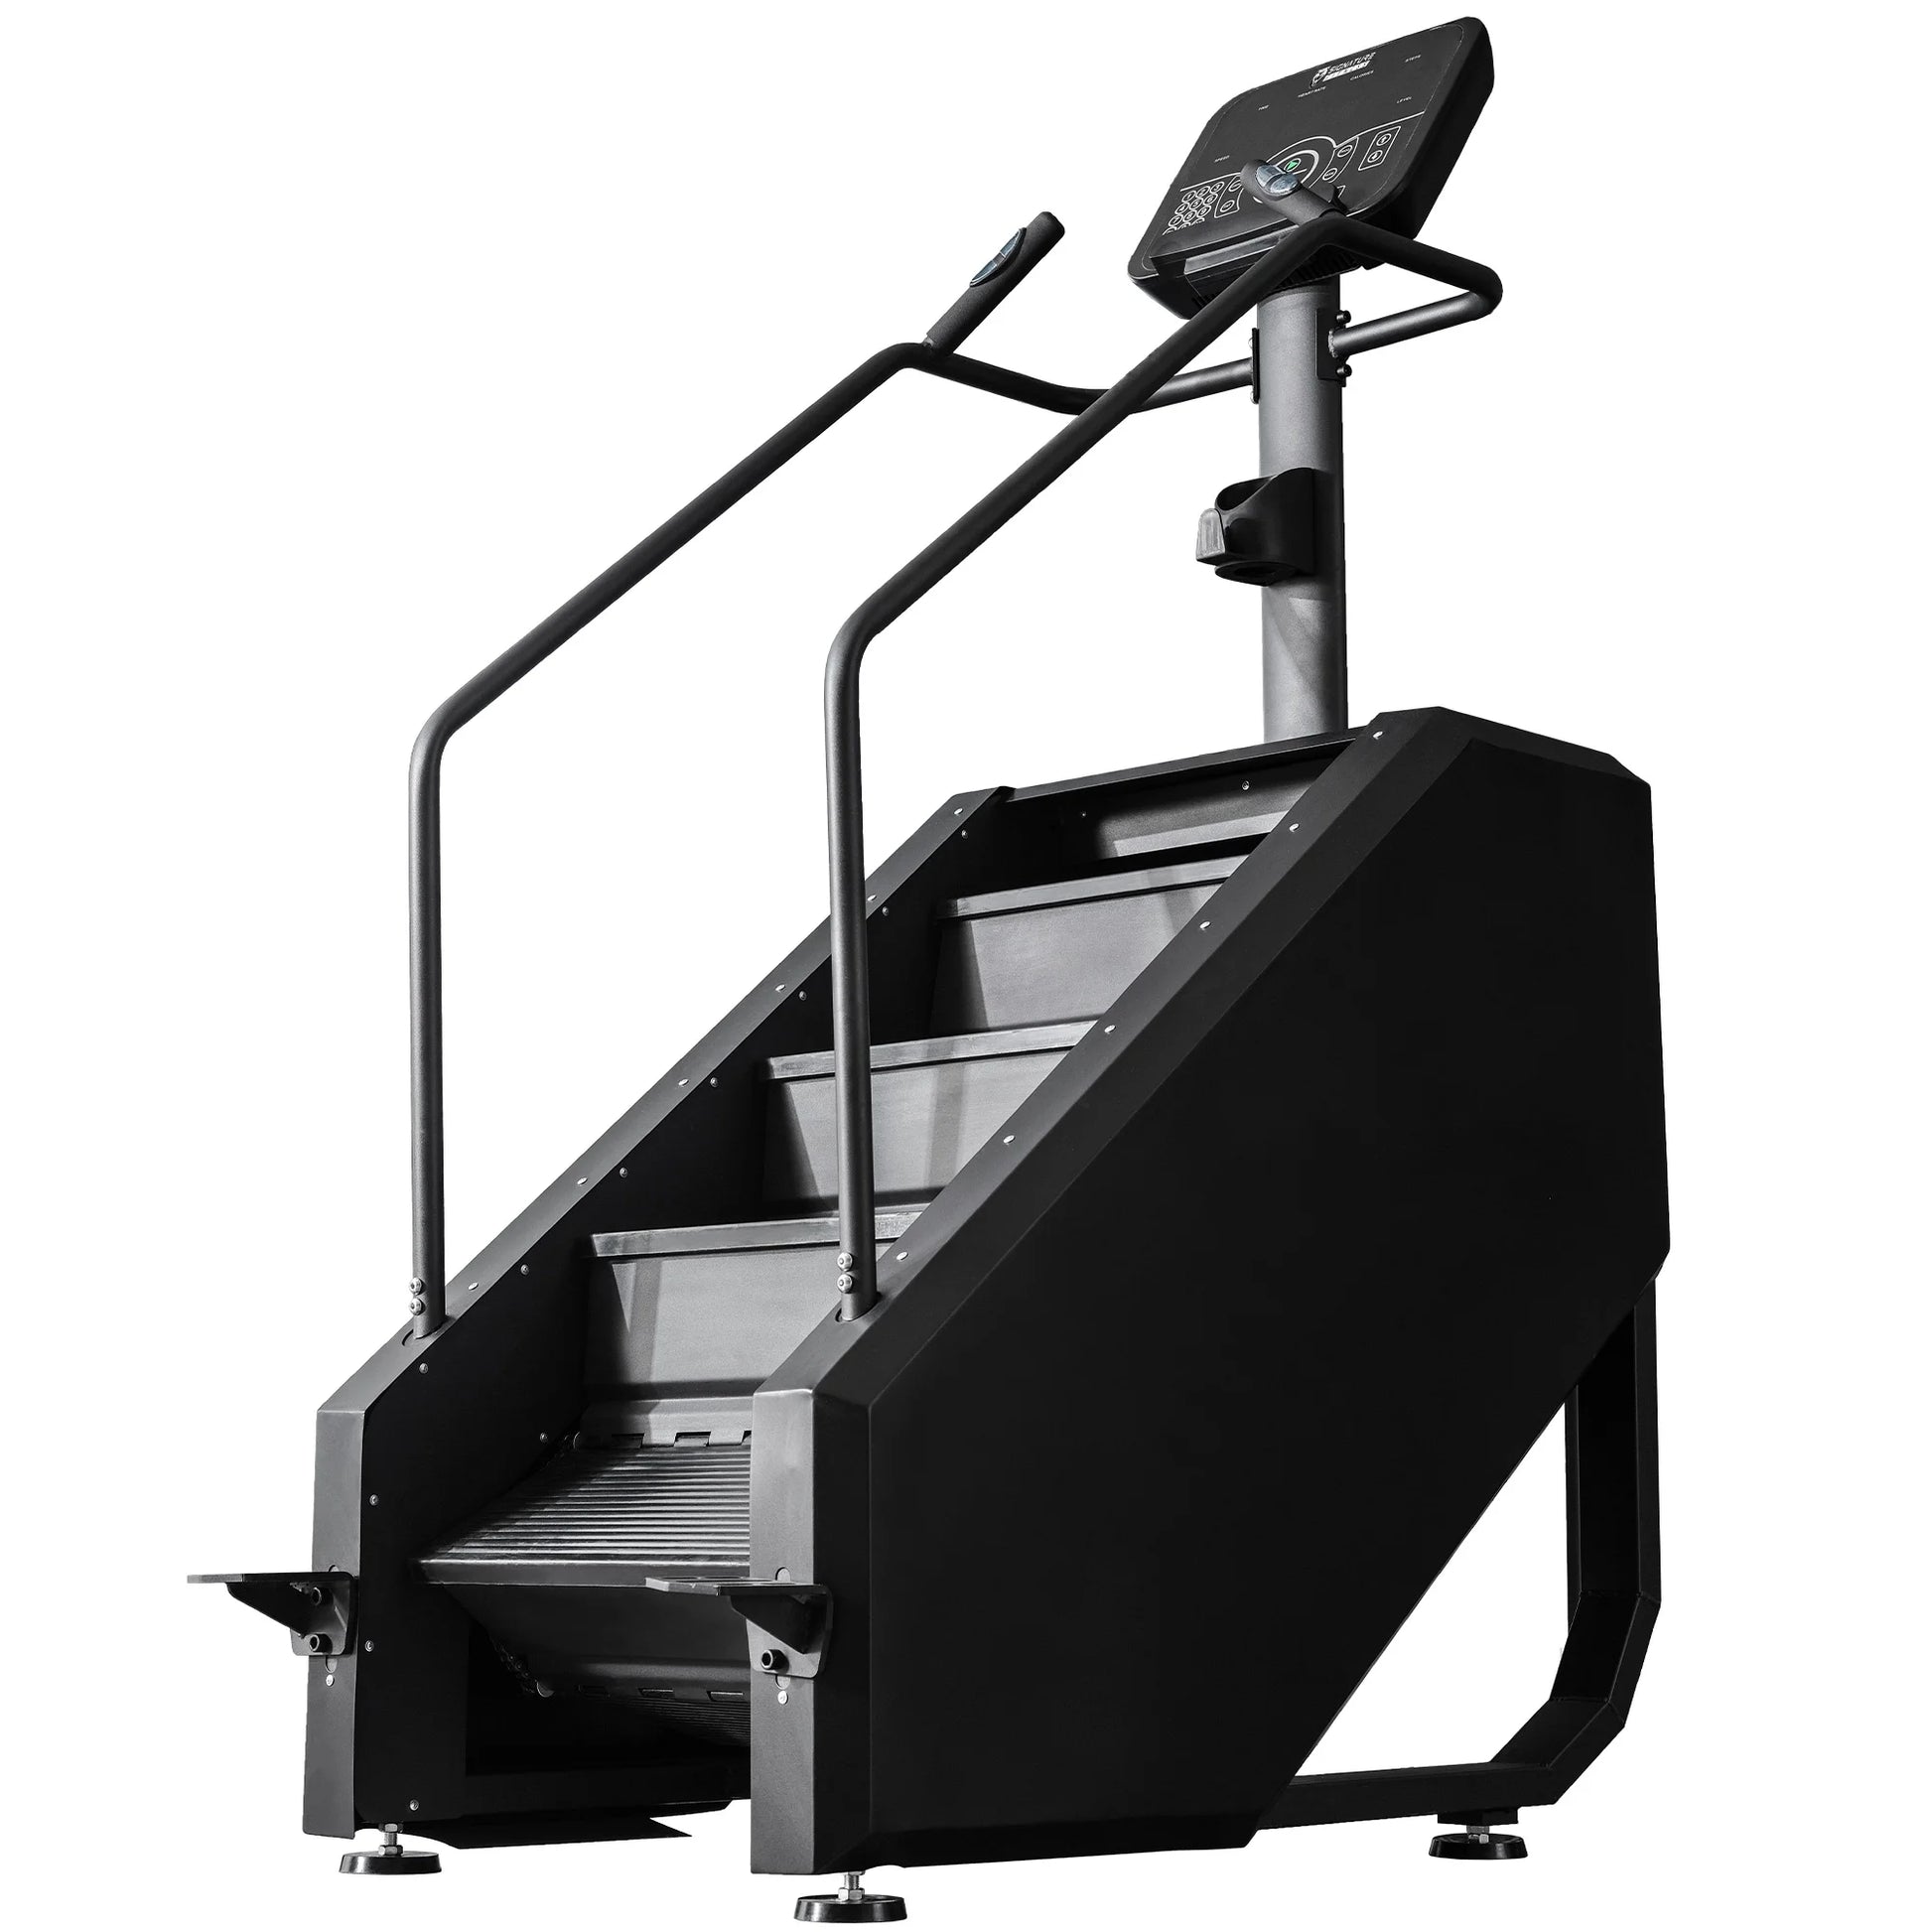 Stair Climber Commercial Grade Stair Step Machine for Cardio and Lower Body Workouts